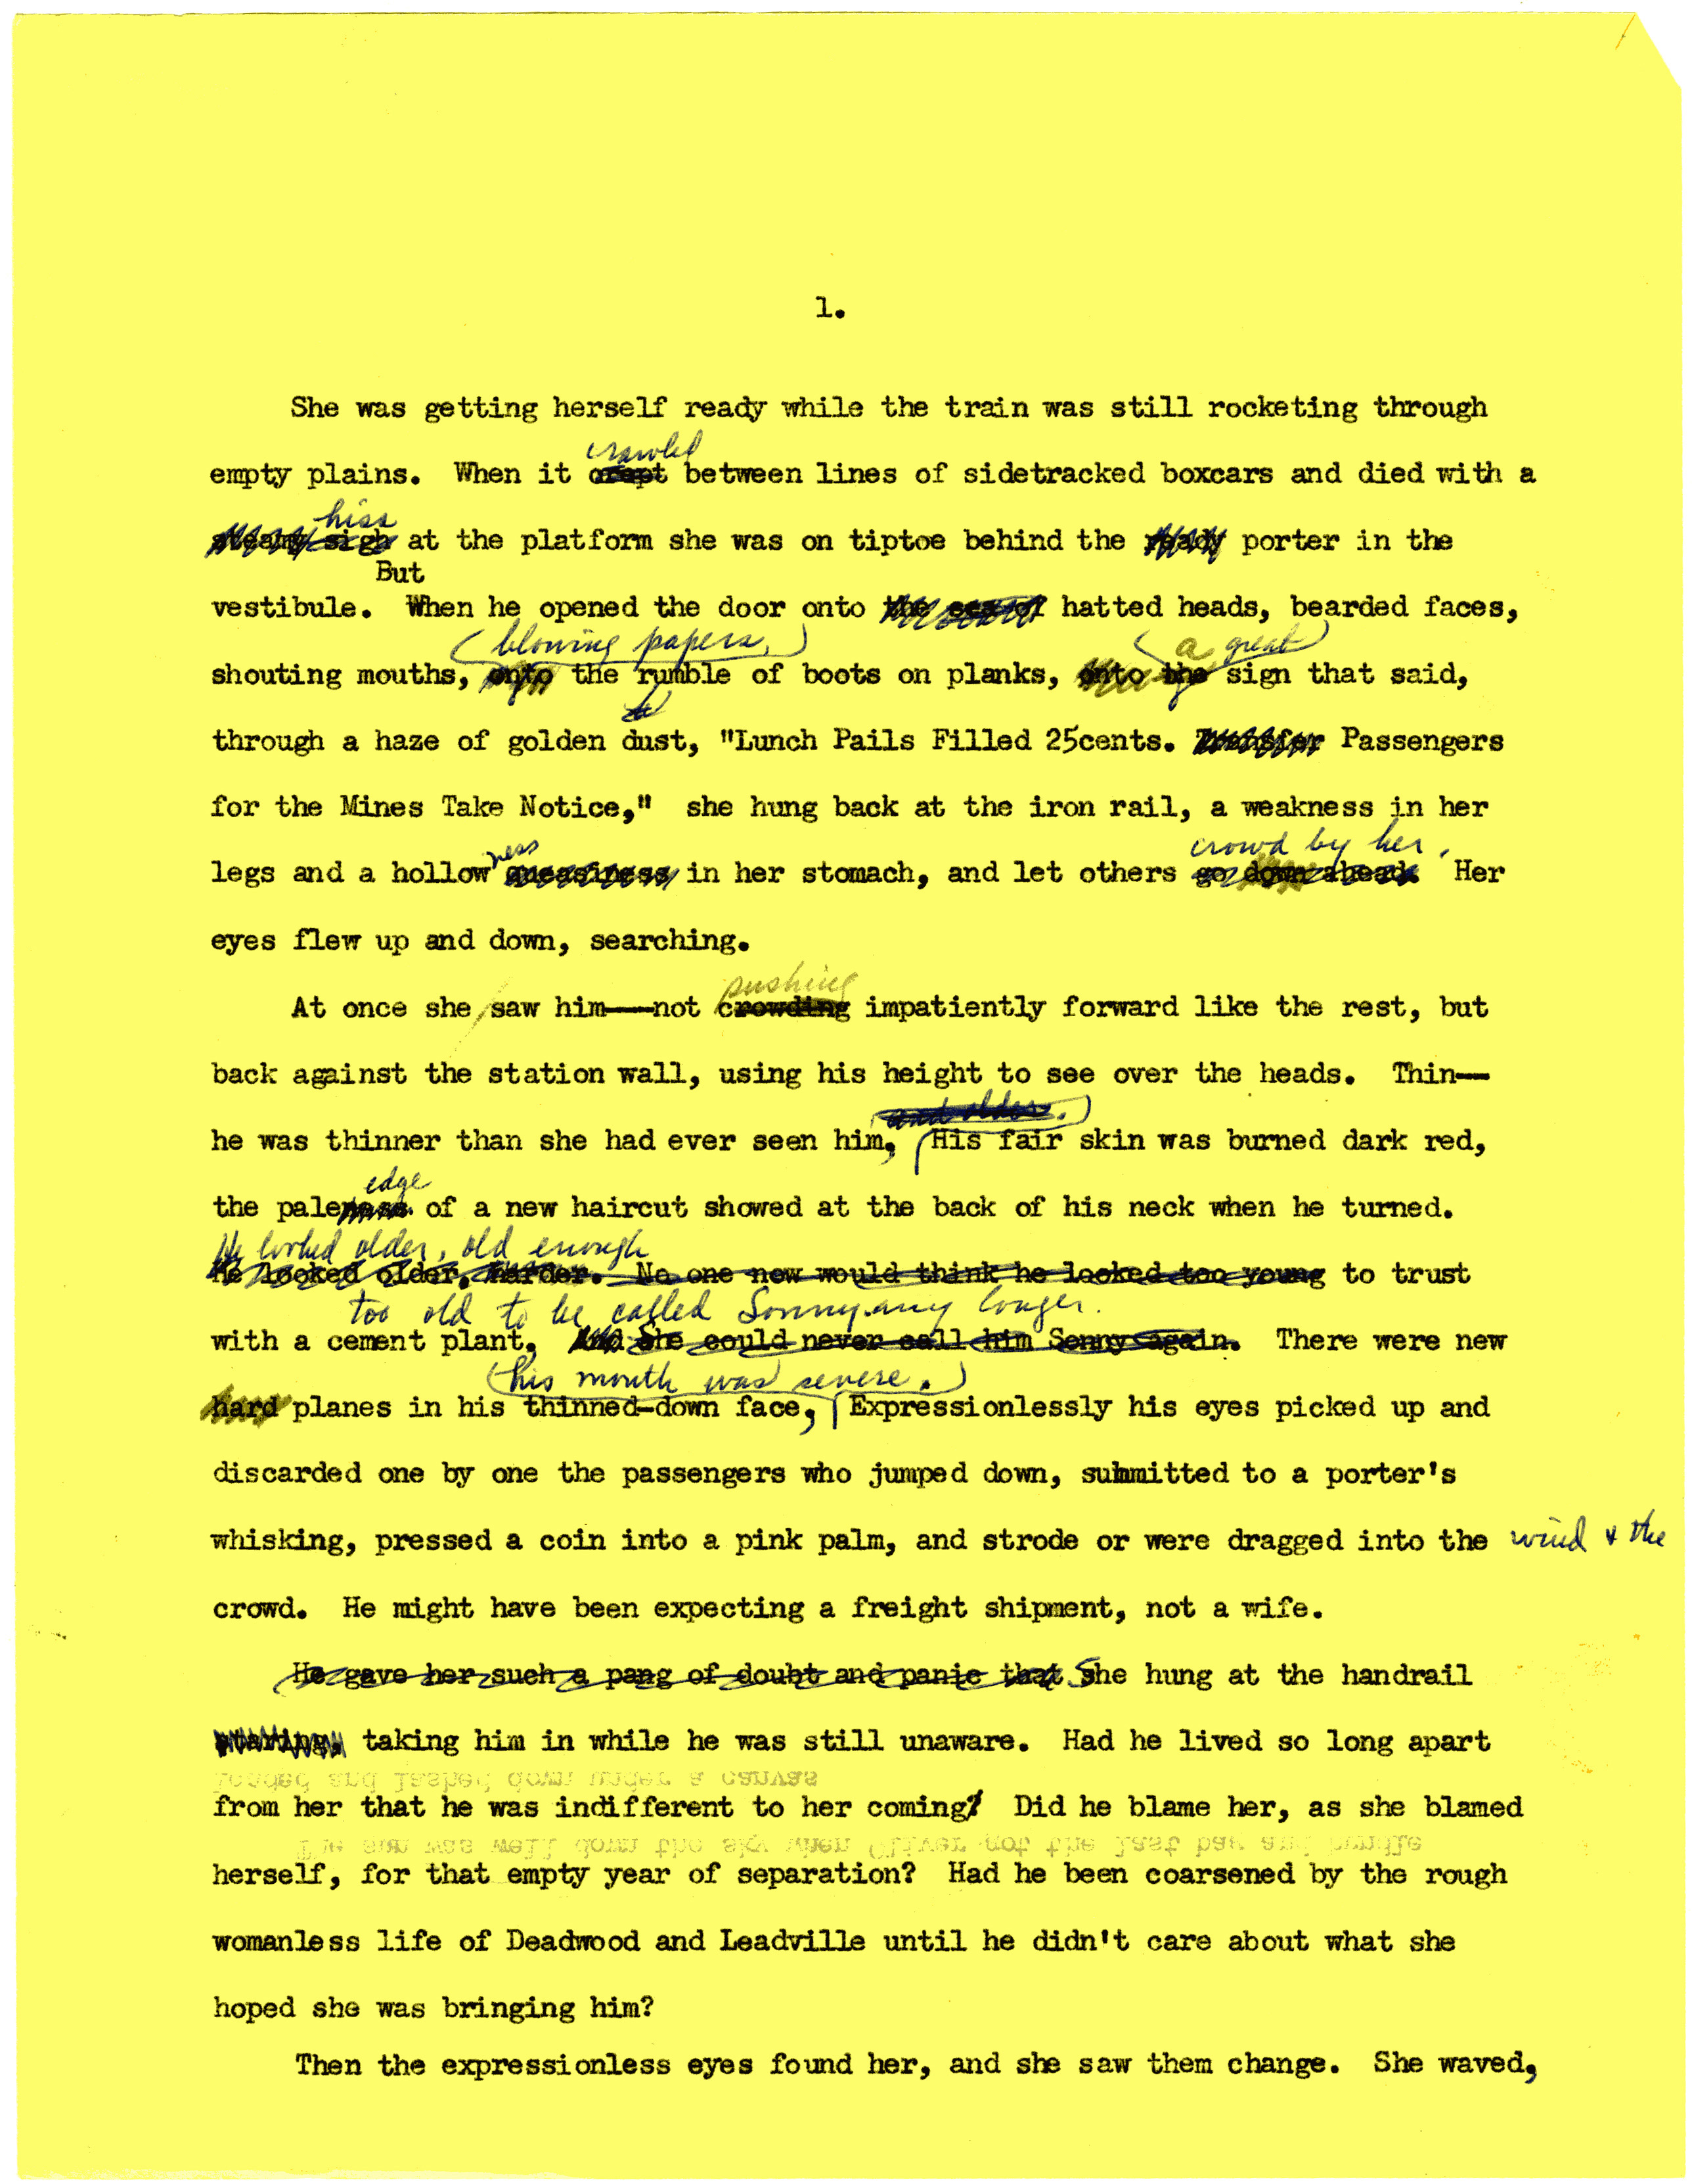 A manuscript page from Wallace Stegner's novel Angle of Repose